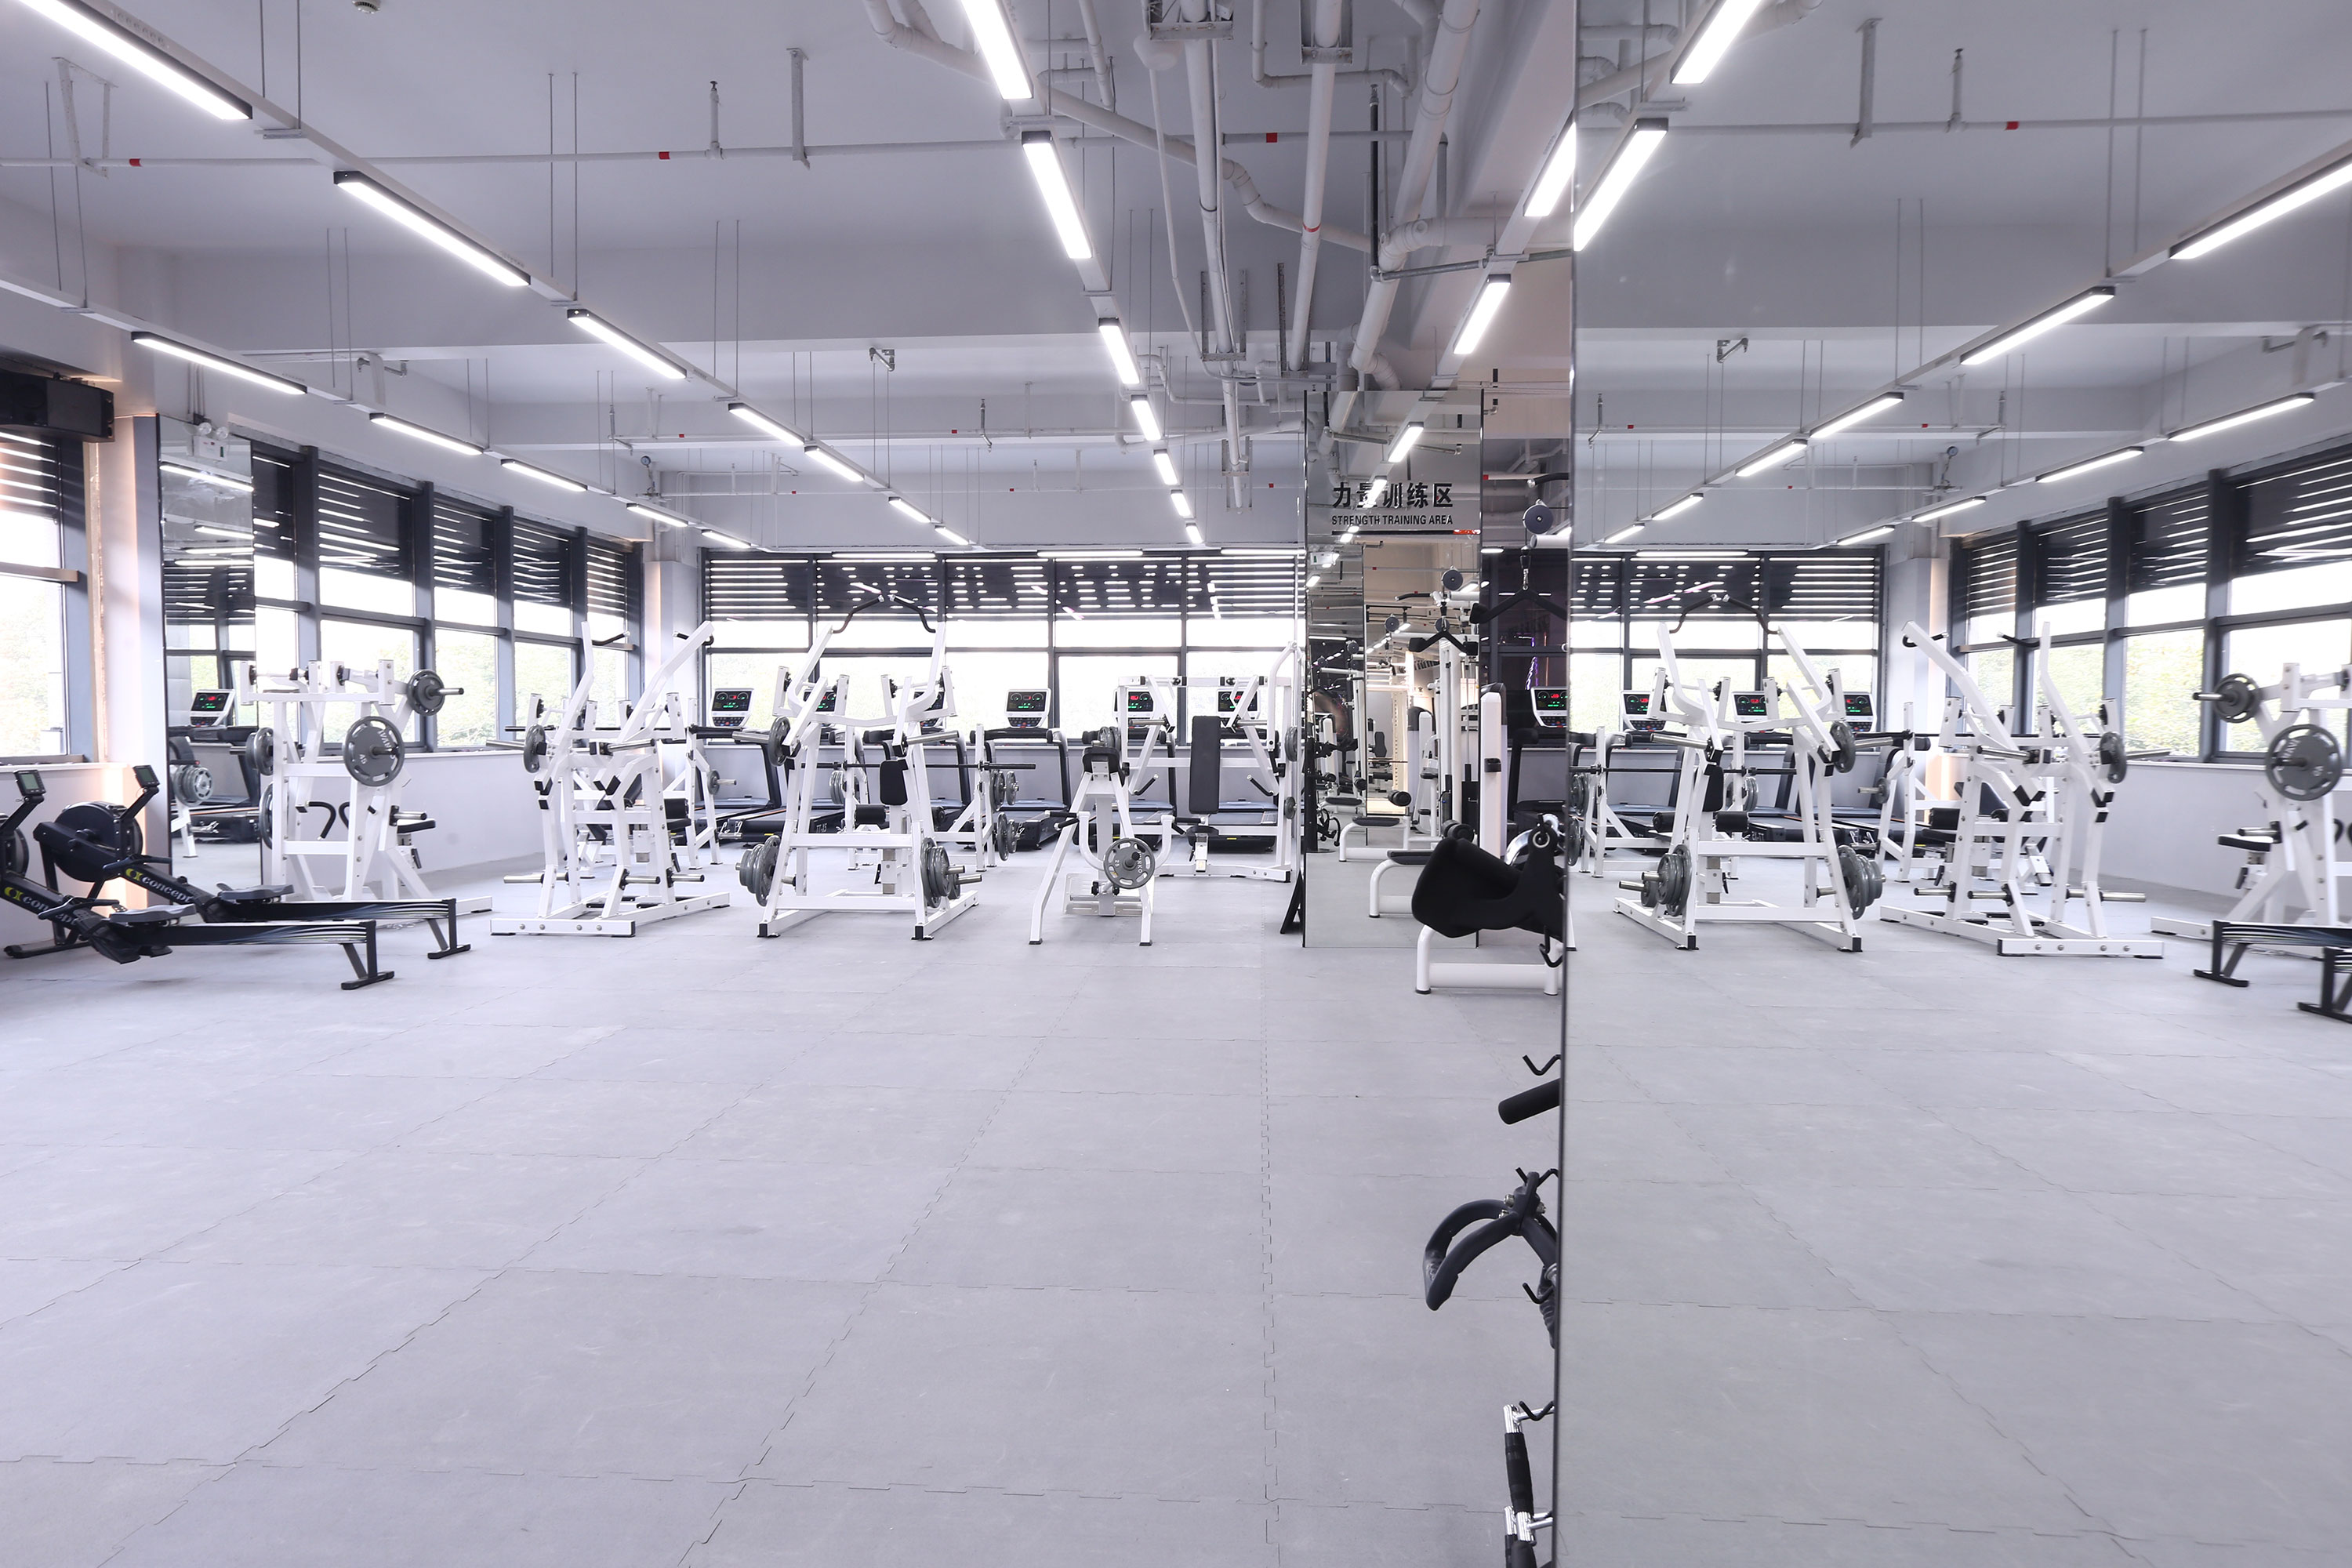 What kind of flooring is recommended for the gym? Are there any differences between the wooden flooring in the gym and the wooden floors in other spaces?